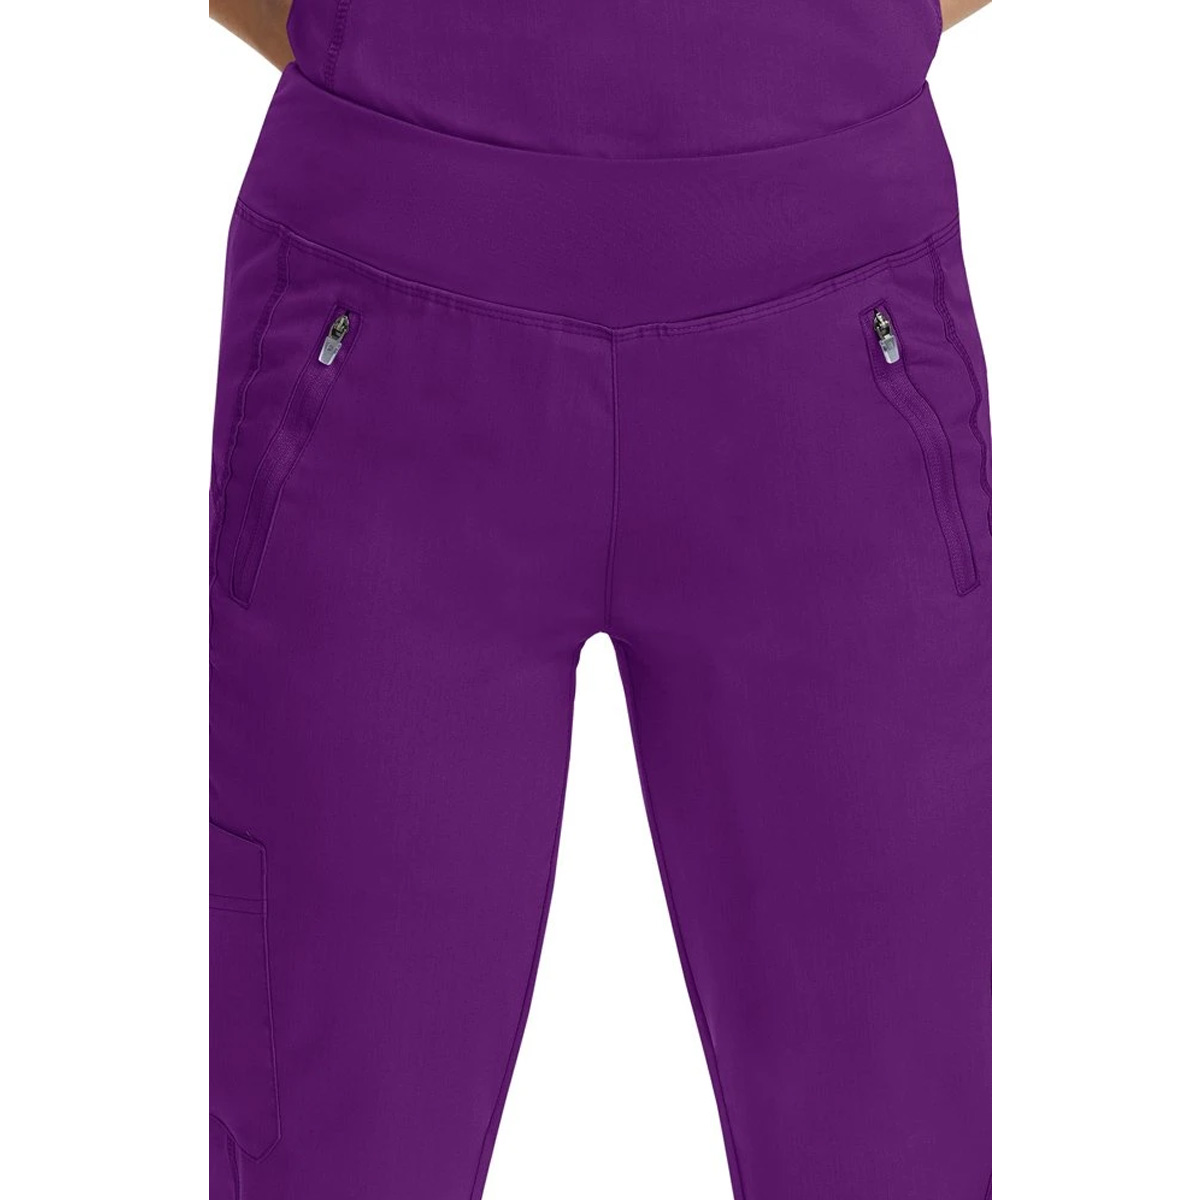 adviicd Sport Tummy Control Cotton Yoga Pants for Women Casual Running  Tight Trouser Healing Hands Purple Label Scrubs Yoga Pants Workout Leggings  